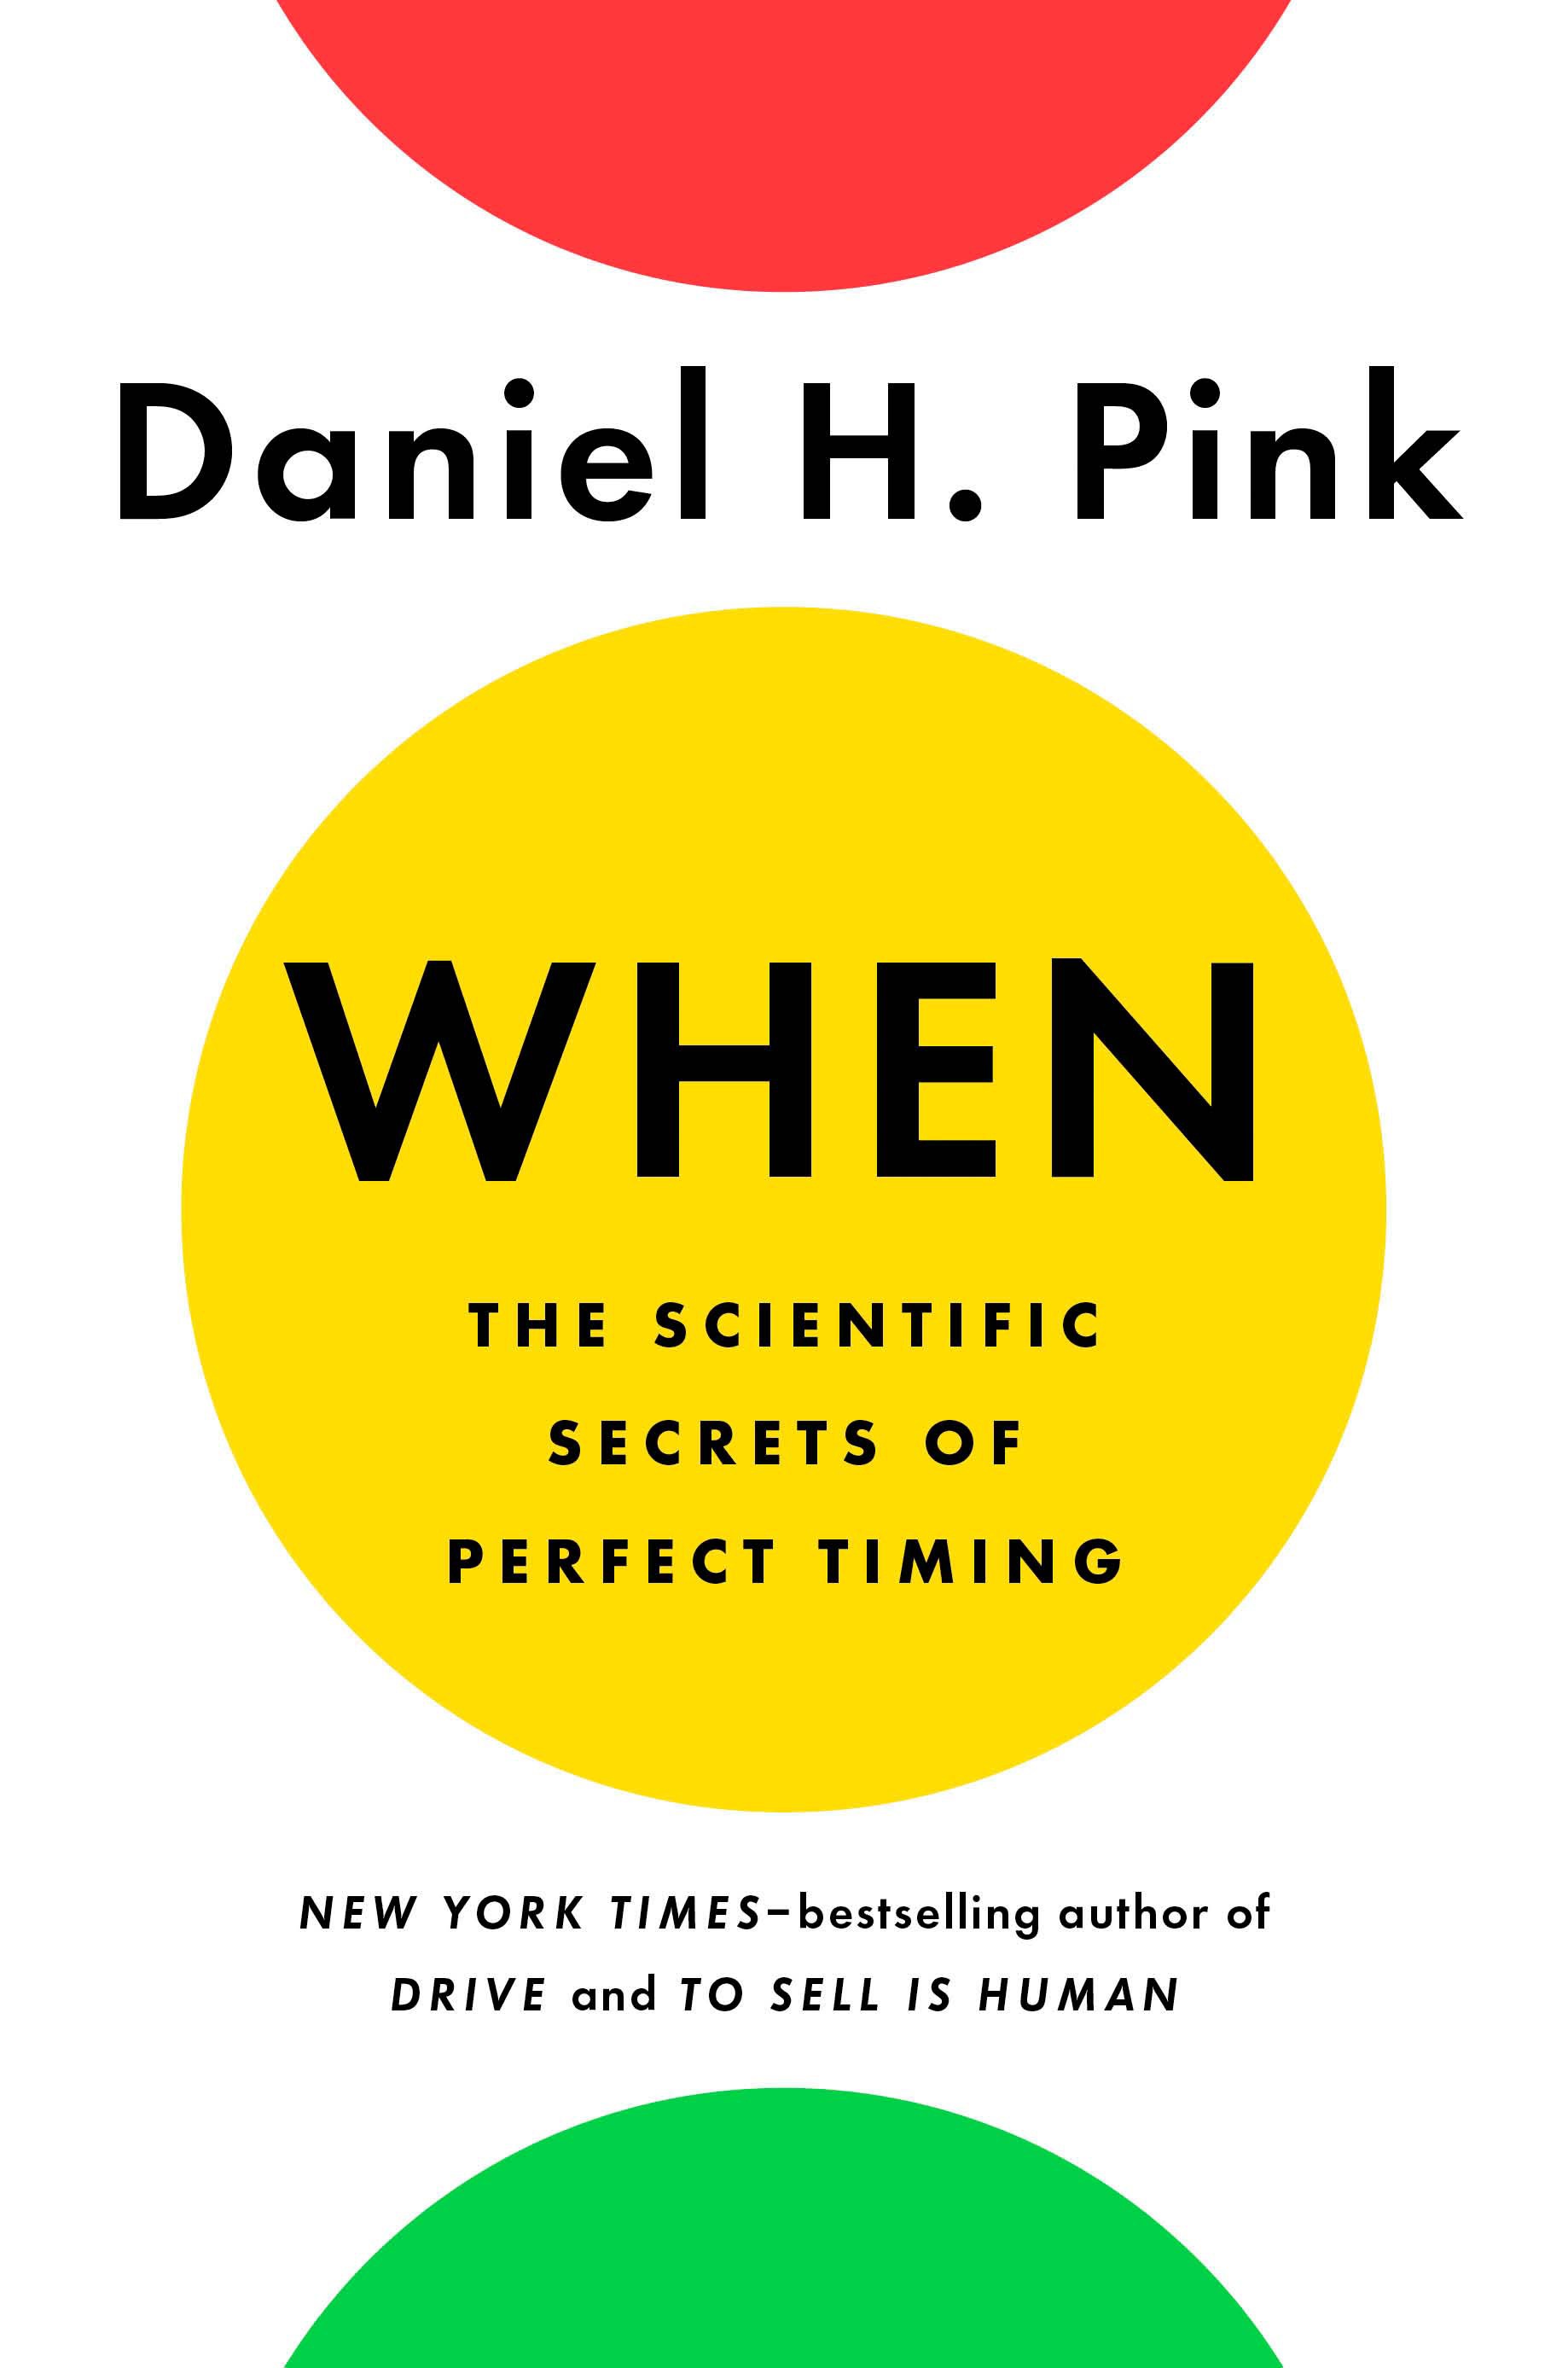 When: The Scientific Secrets of Perfect Timing, by Daniel H. Pink